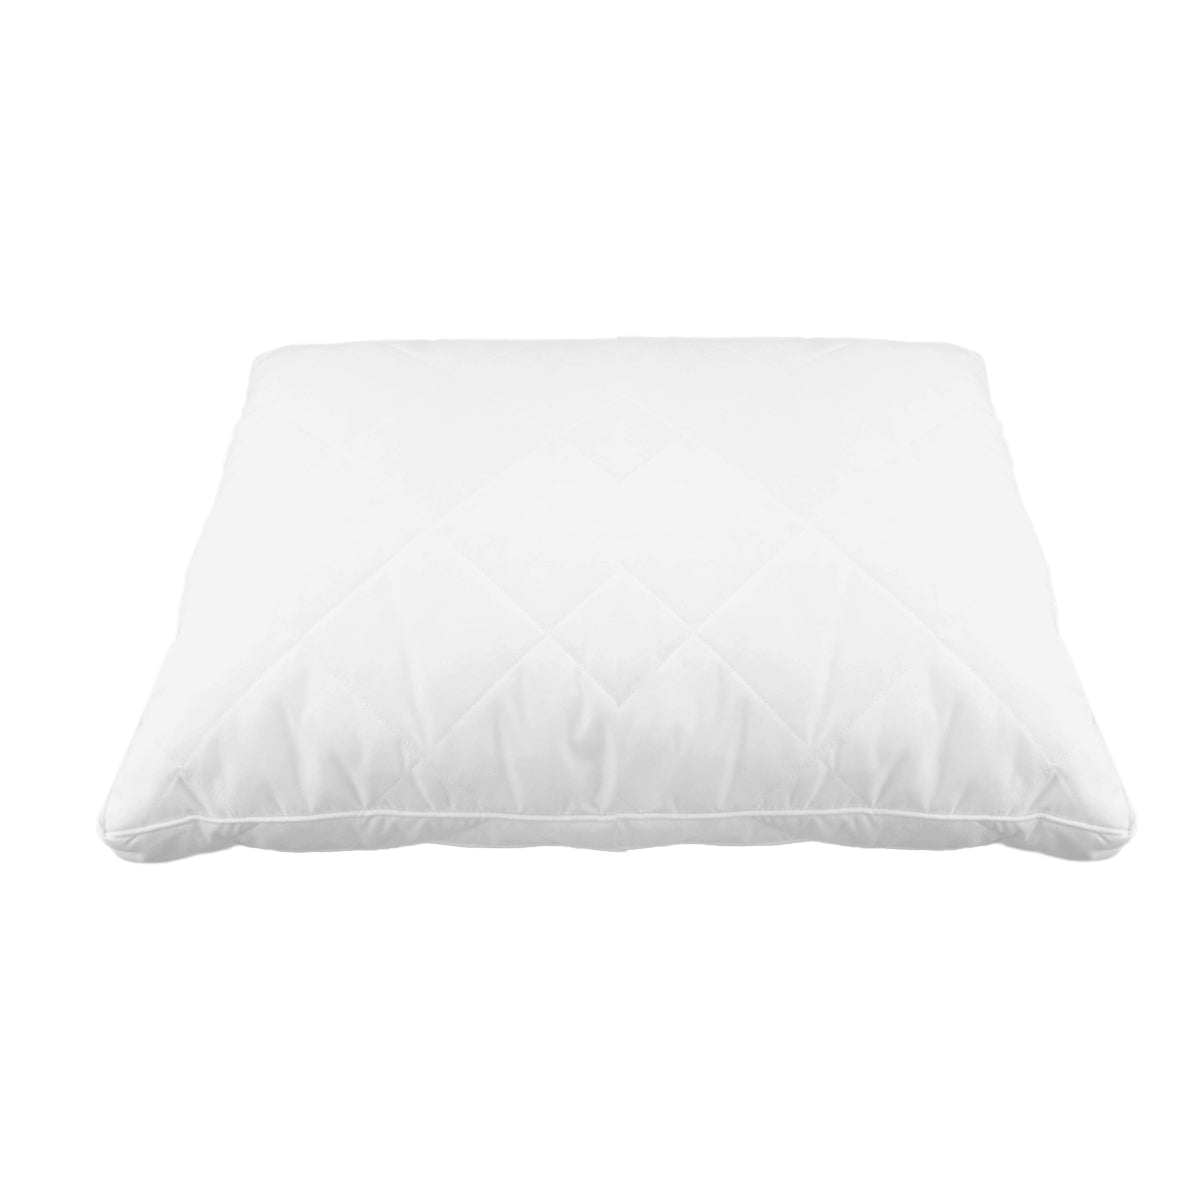 STANDARD PADDED PILLOW WITH BELLOWS AND CORD 9666 